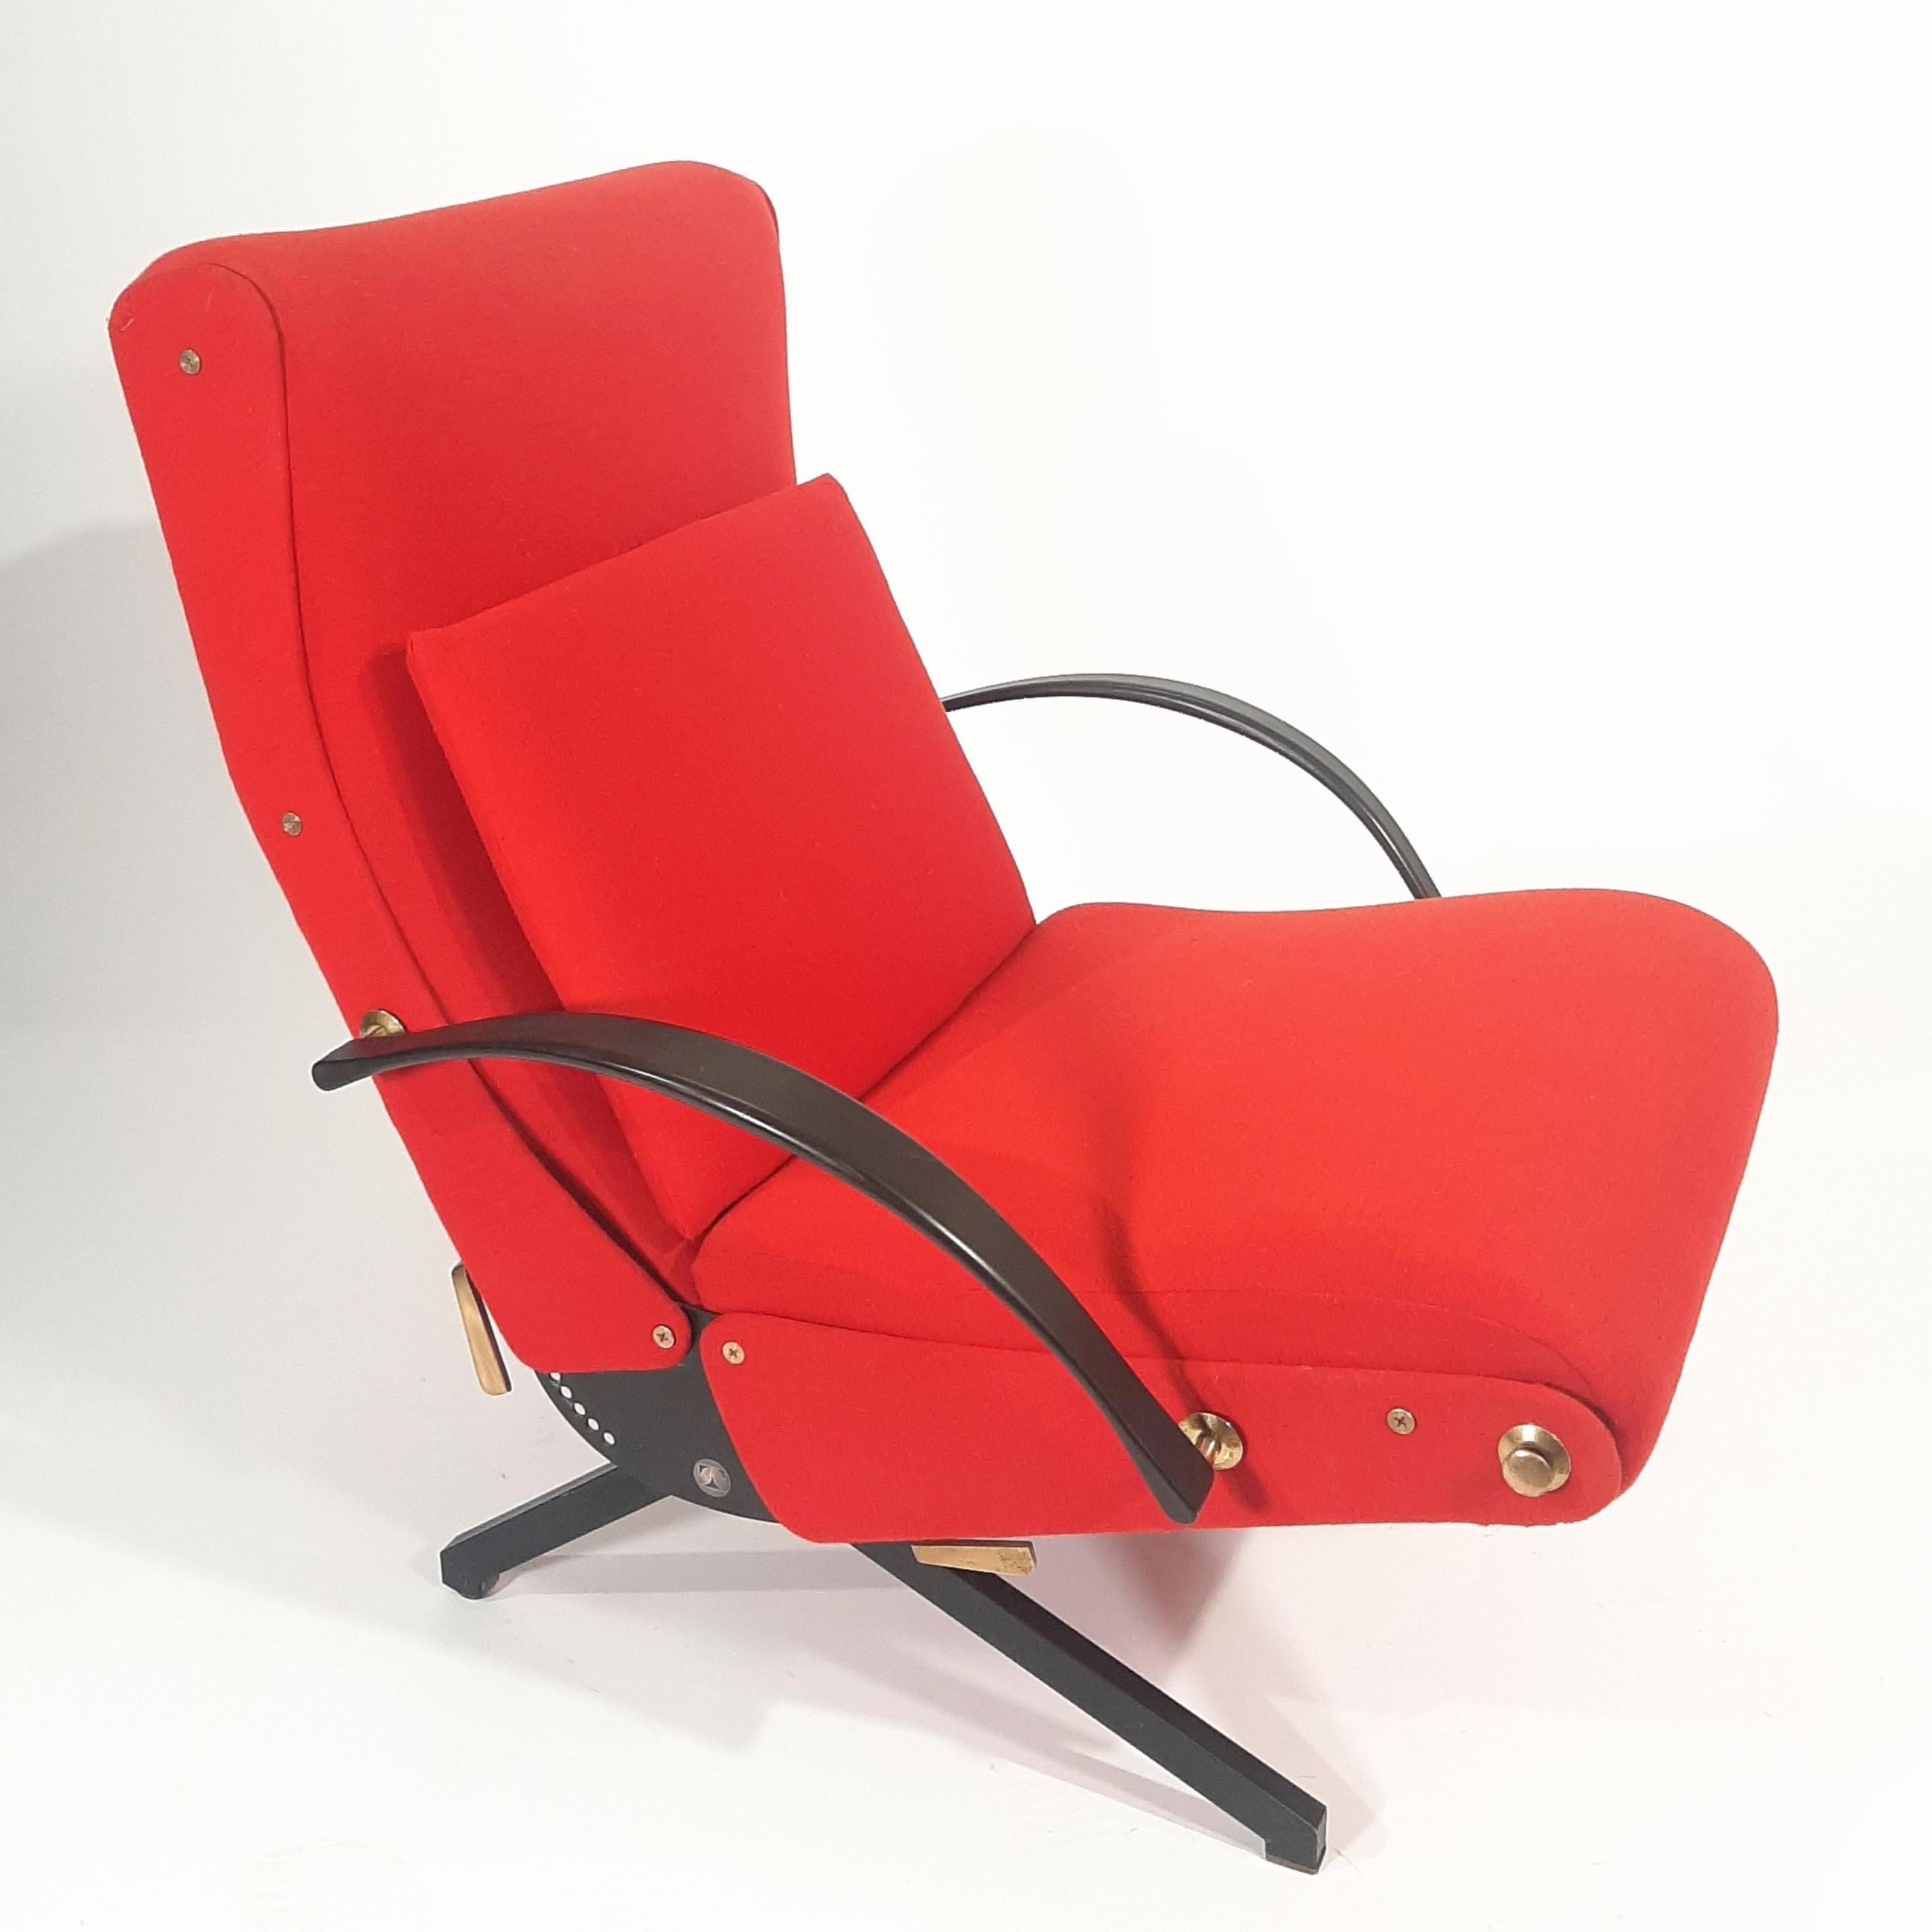 The versatile and comfortable P40 lounge chair was designed by Osvaldo Borsani in 1955 for Tecno. The chair can be adjusted into over 400 positions; the back can be reclined in different angles, the headrest moves up and down, the flexible rubber